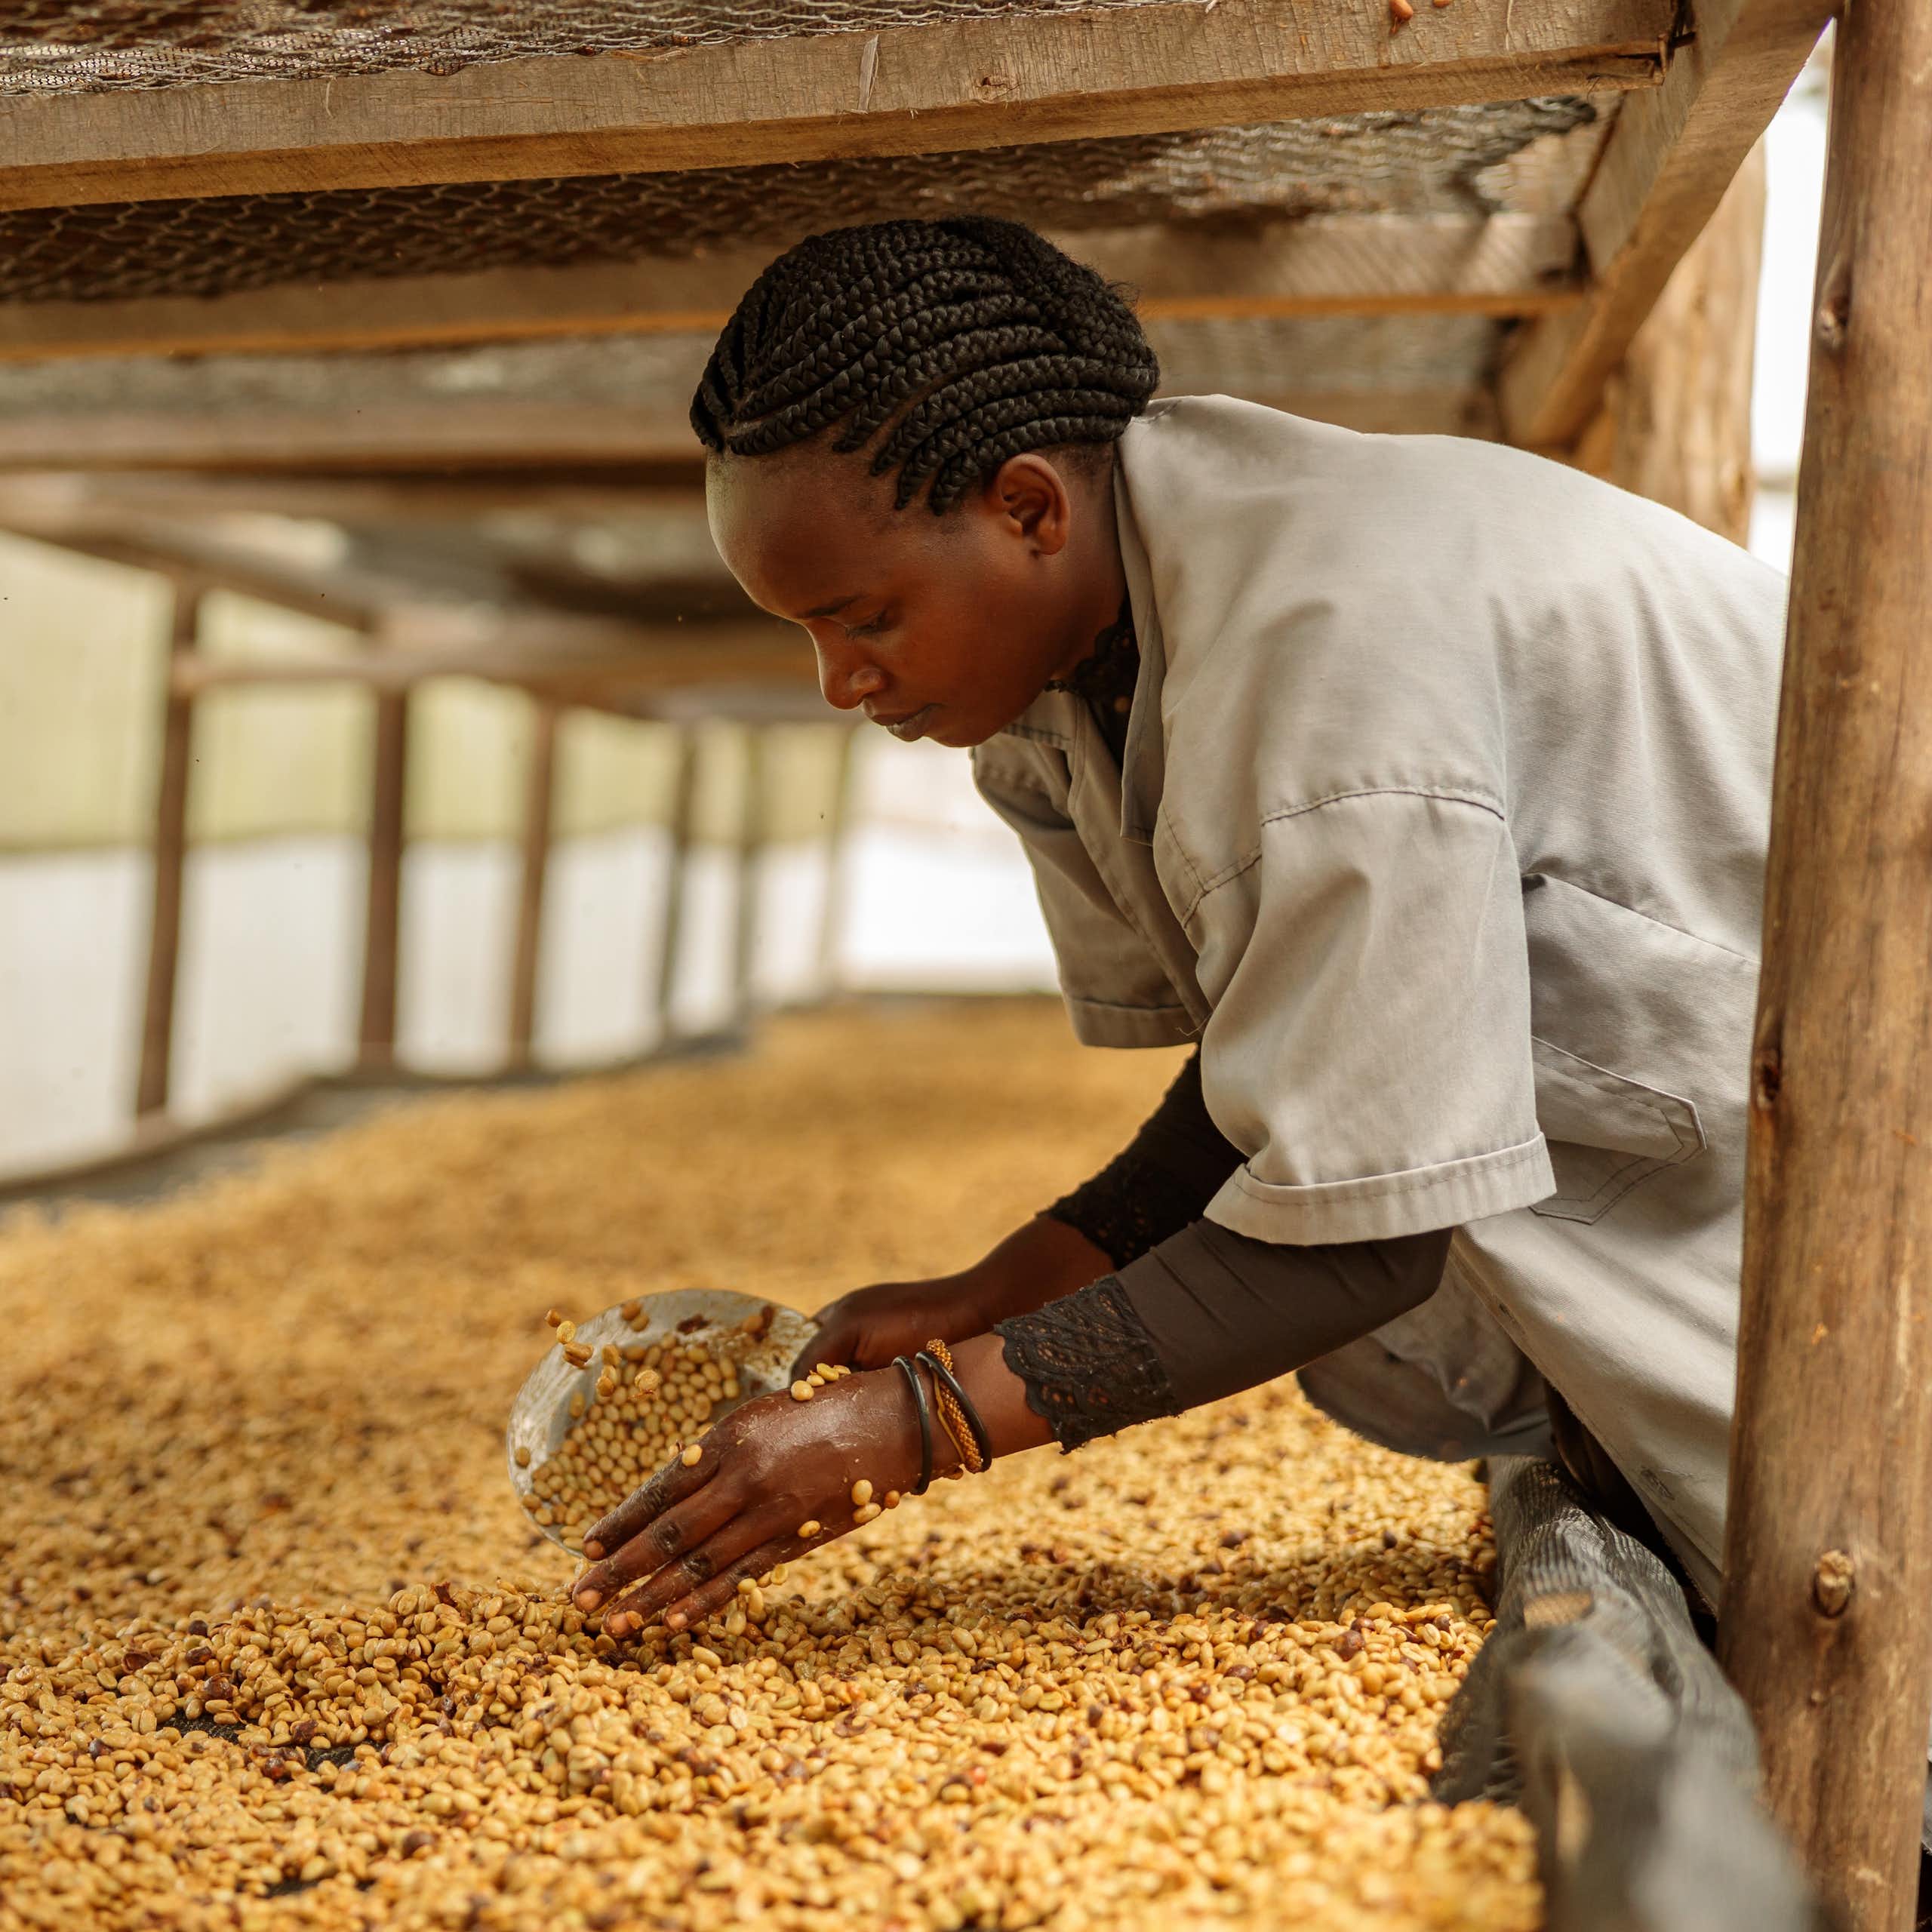 Woman working with coffee beans